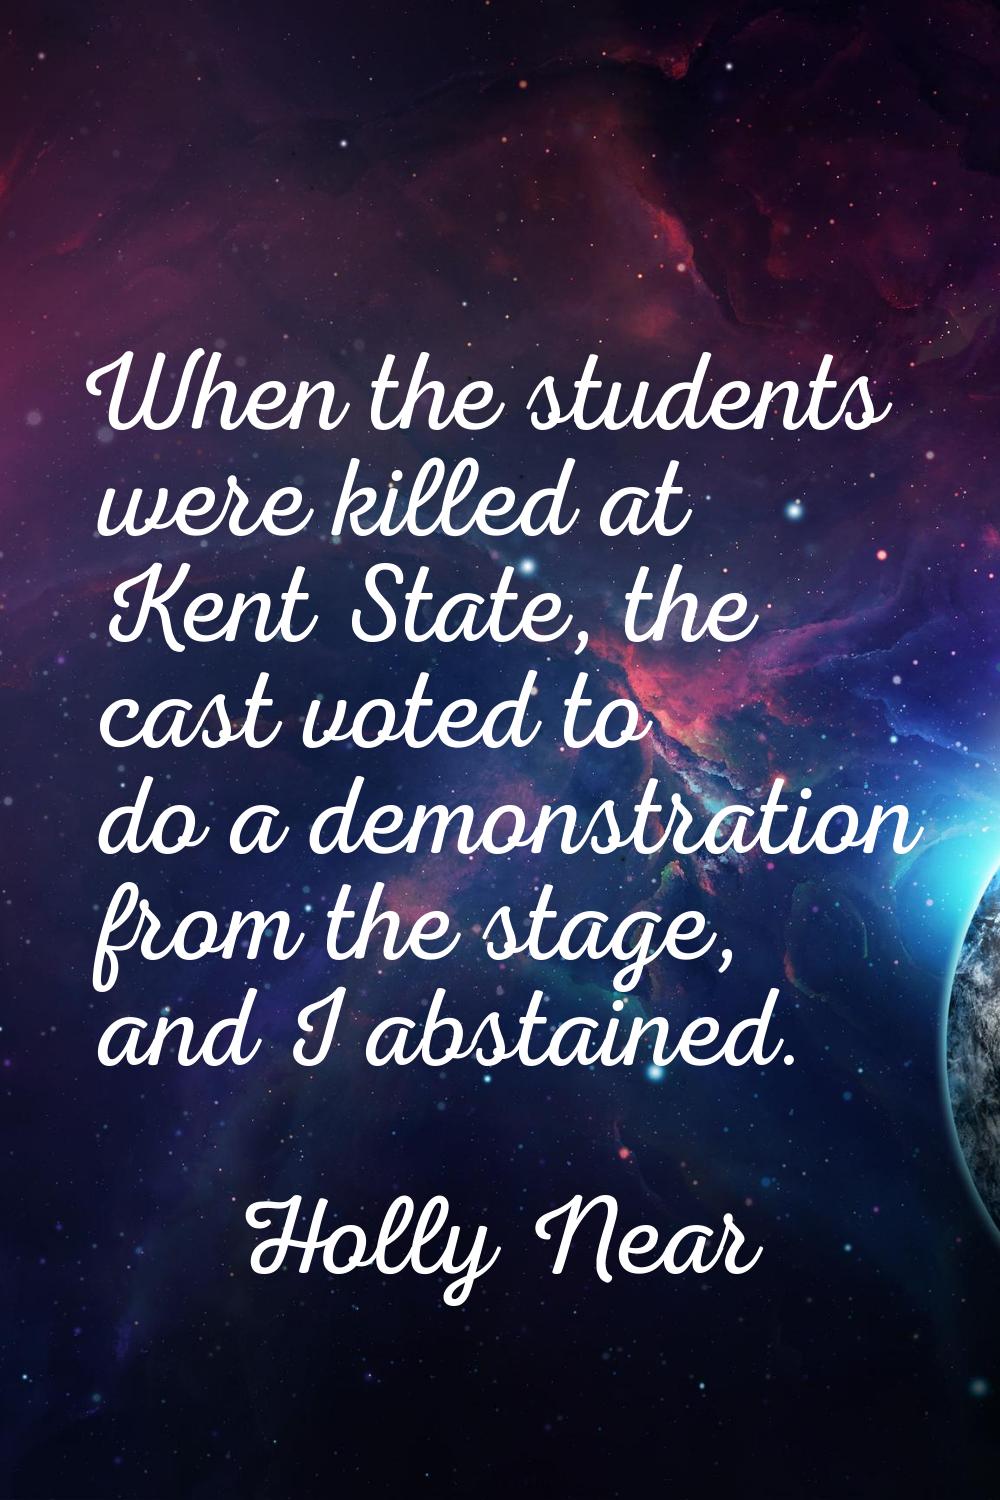 When the students were killed at Kent State, the cast voted to do a demonstration from the stage, a